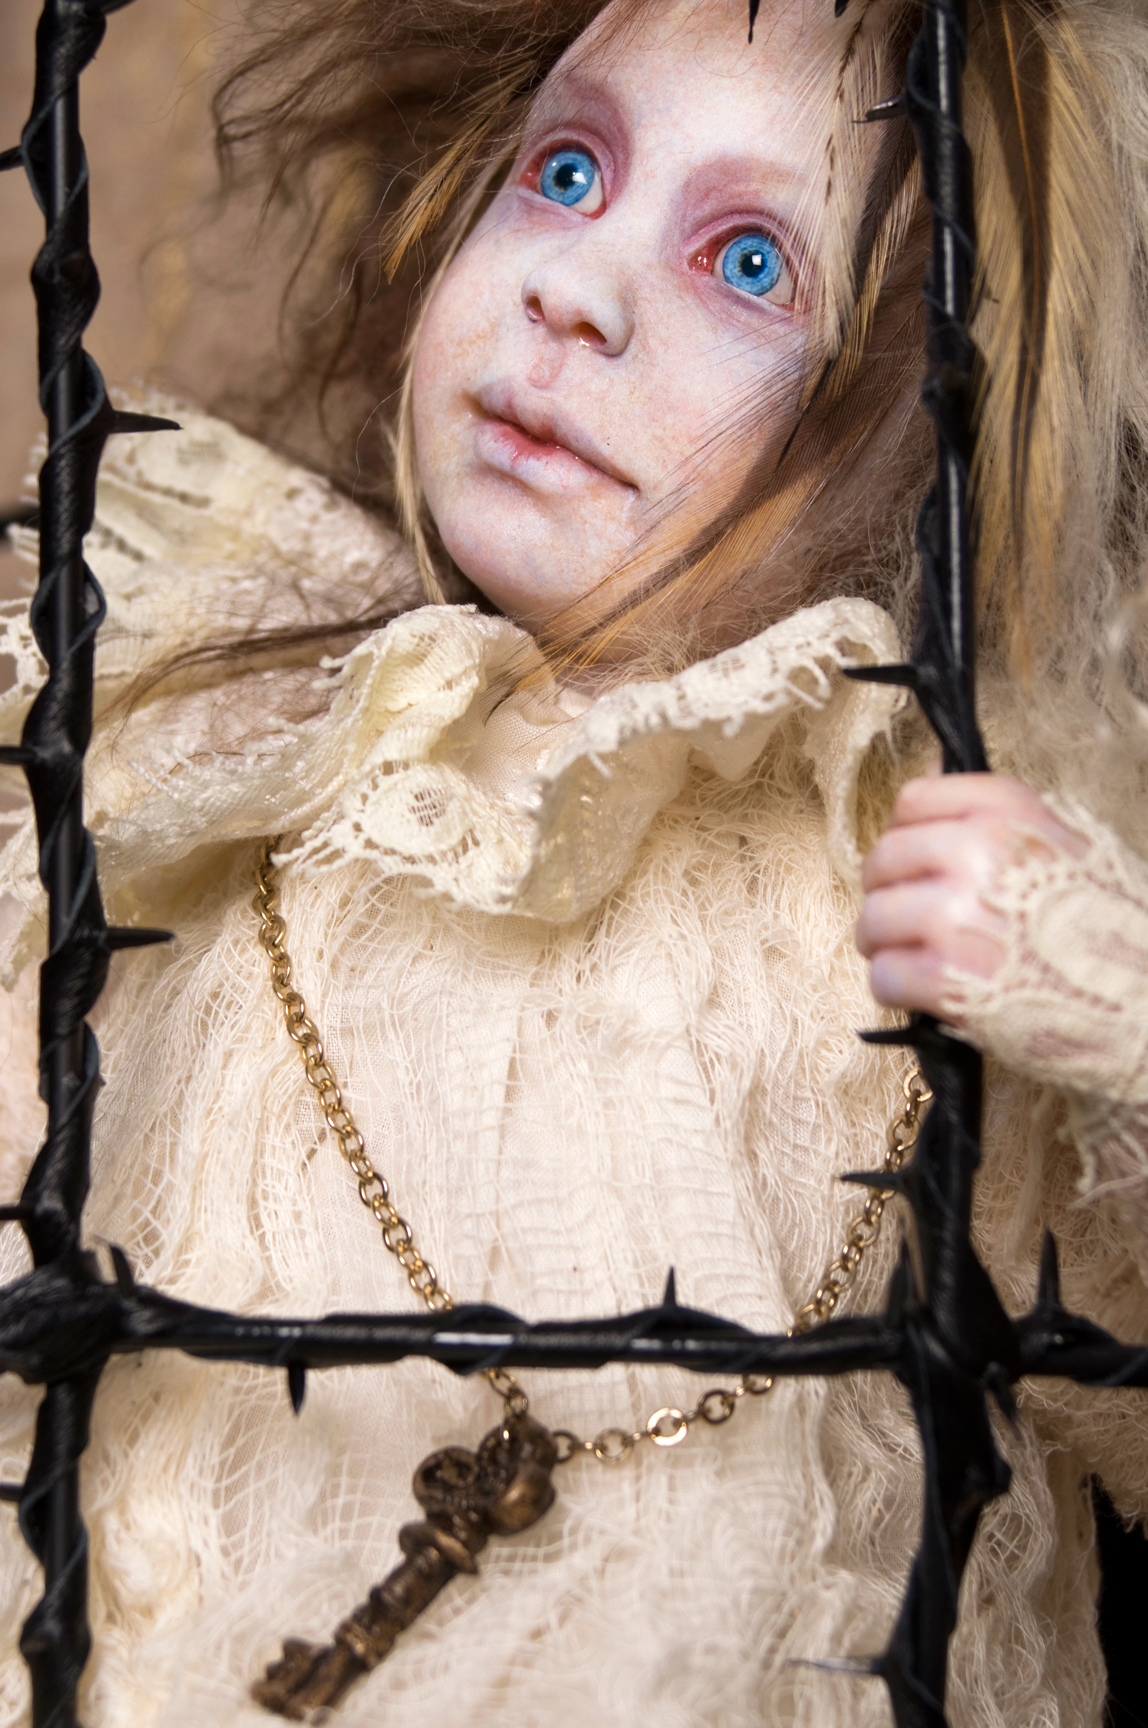 pale blue eyed blond feathered gothic artdoll in a white lace nightie sits in a black thorn cage with a large key on a chain around his neck.